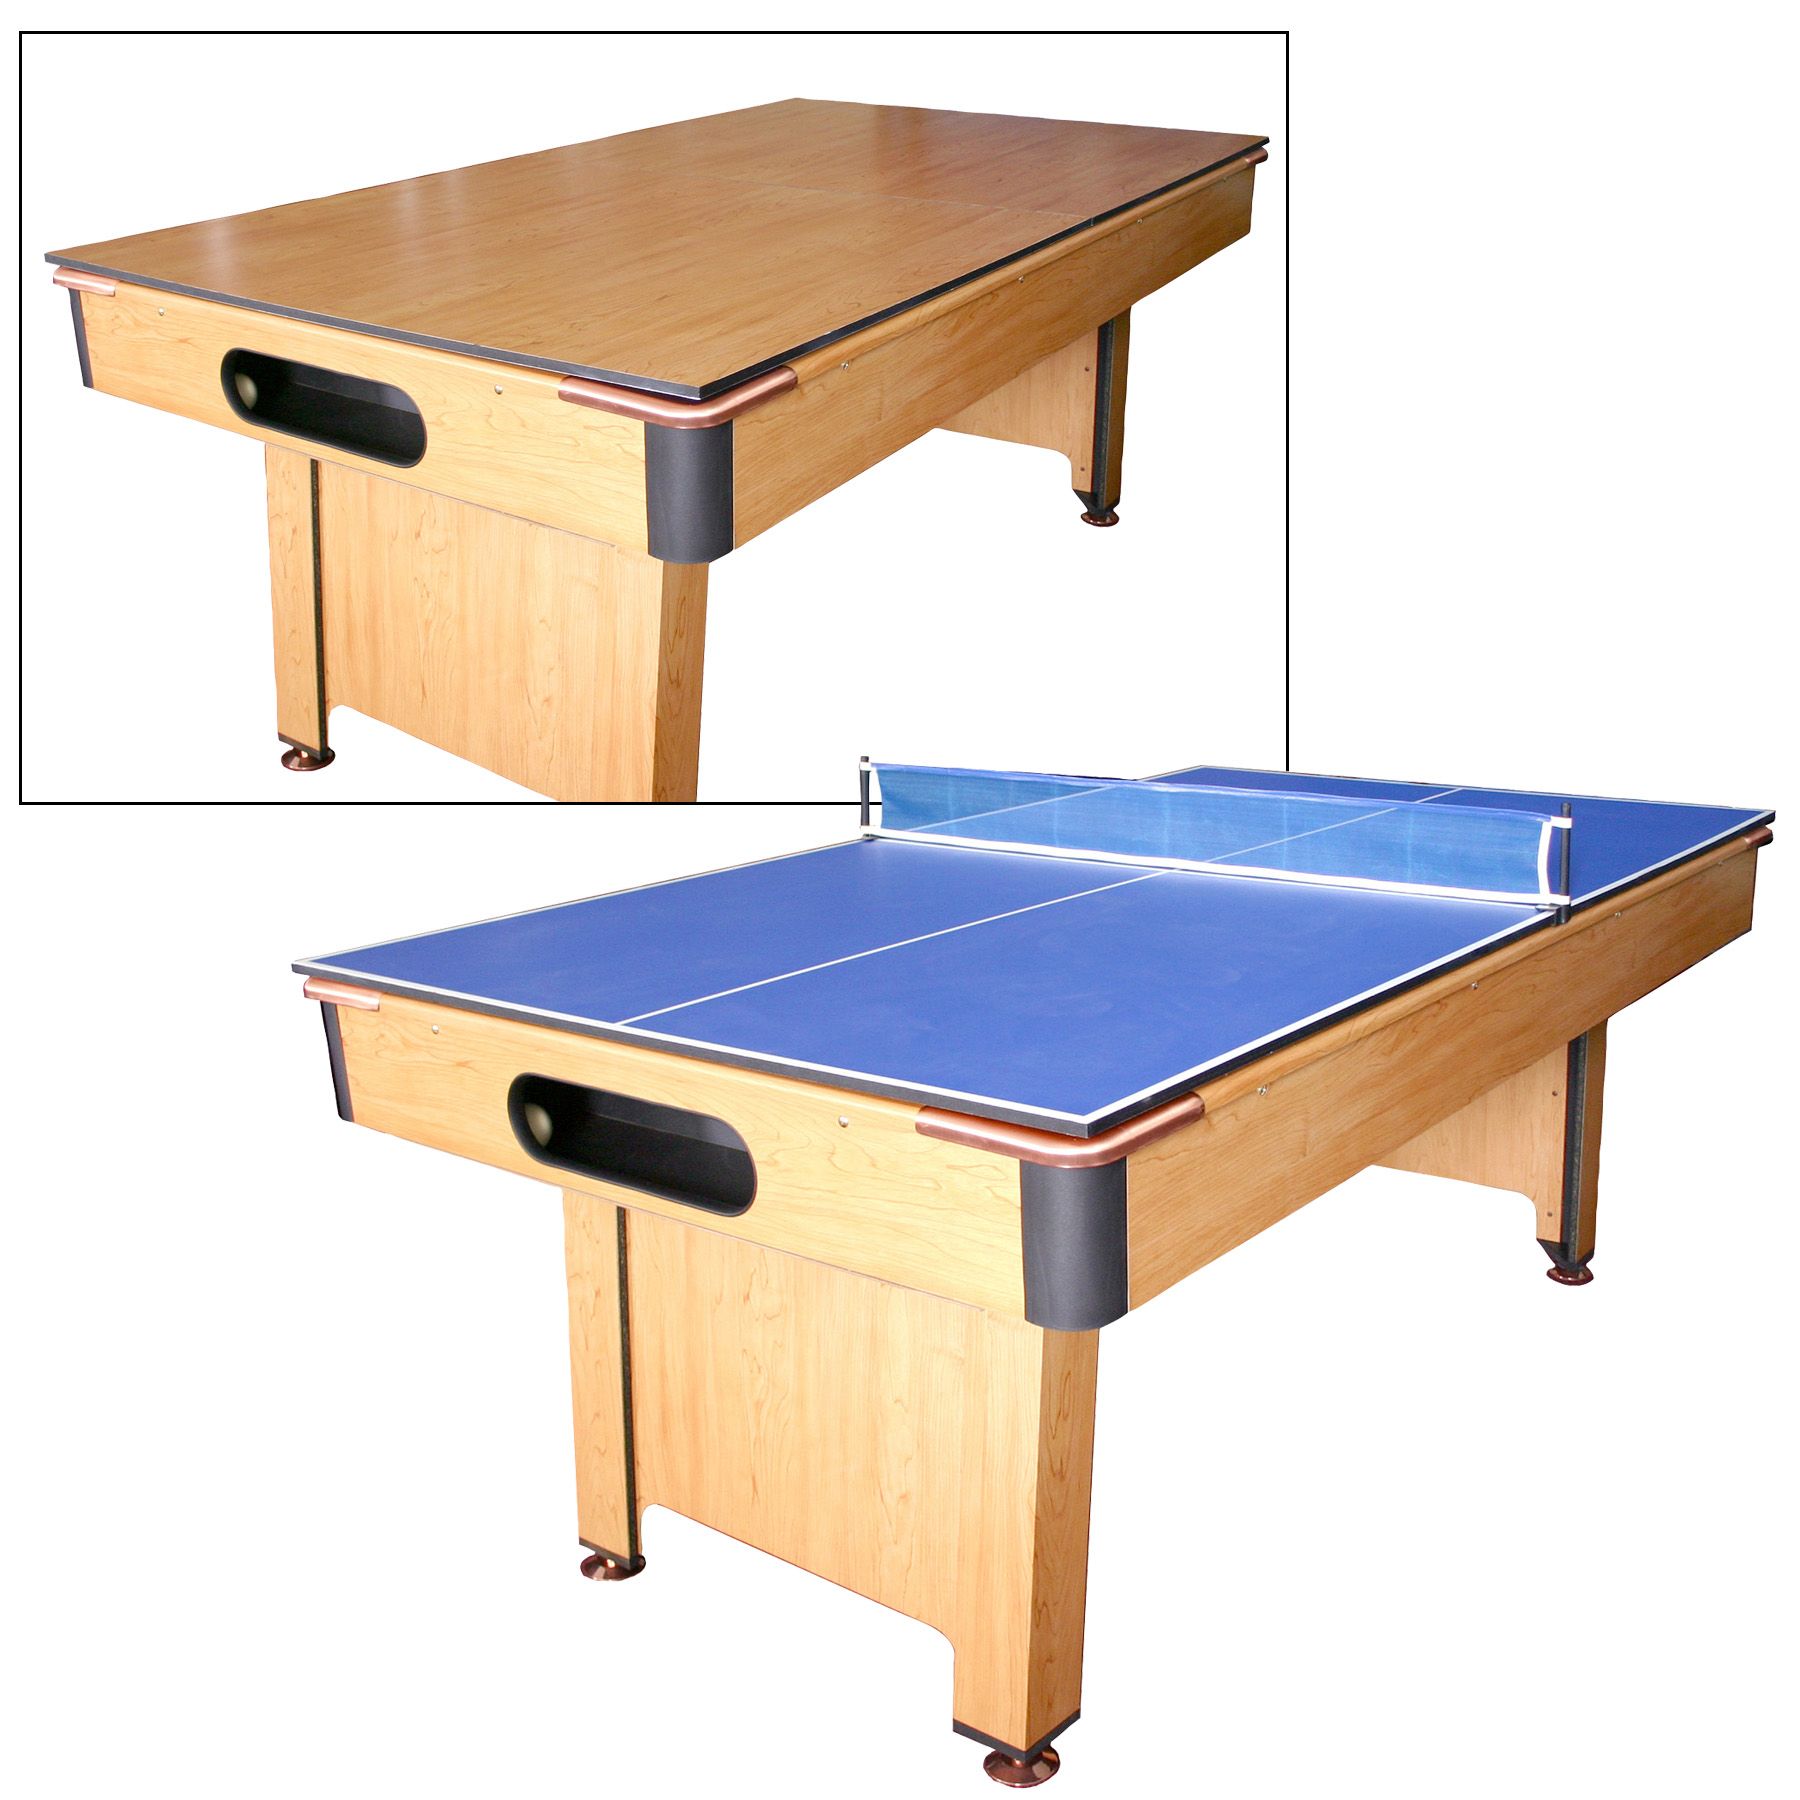 7' Dining and Table Tennis Conversion Top